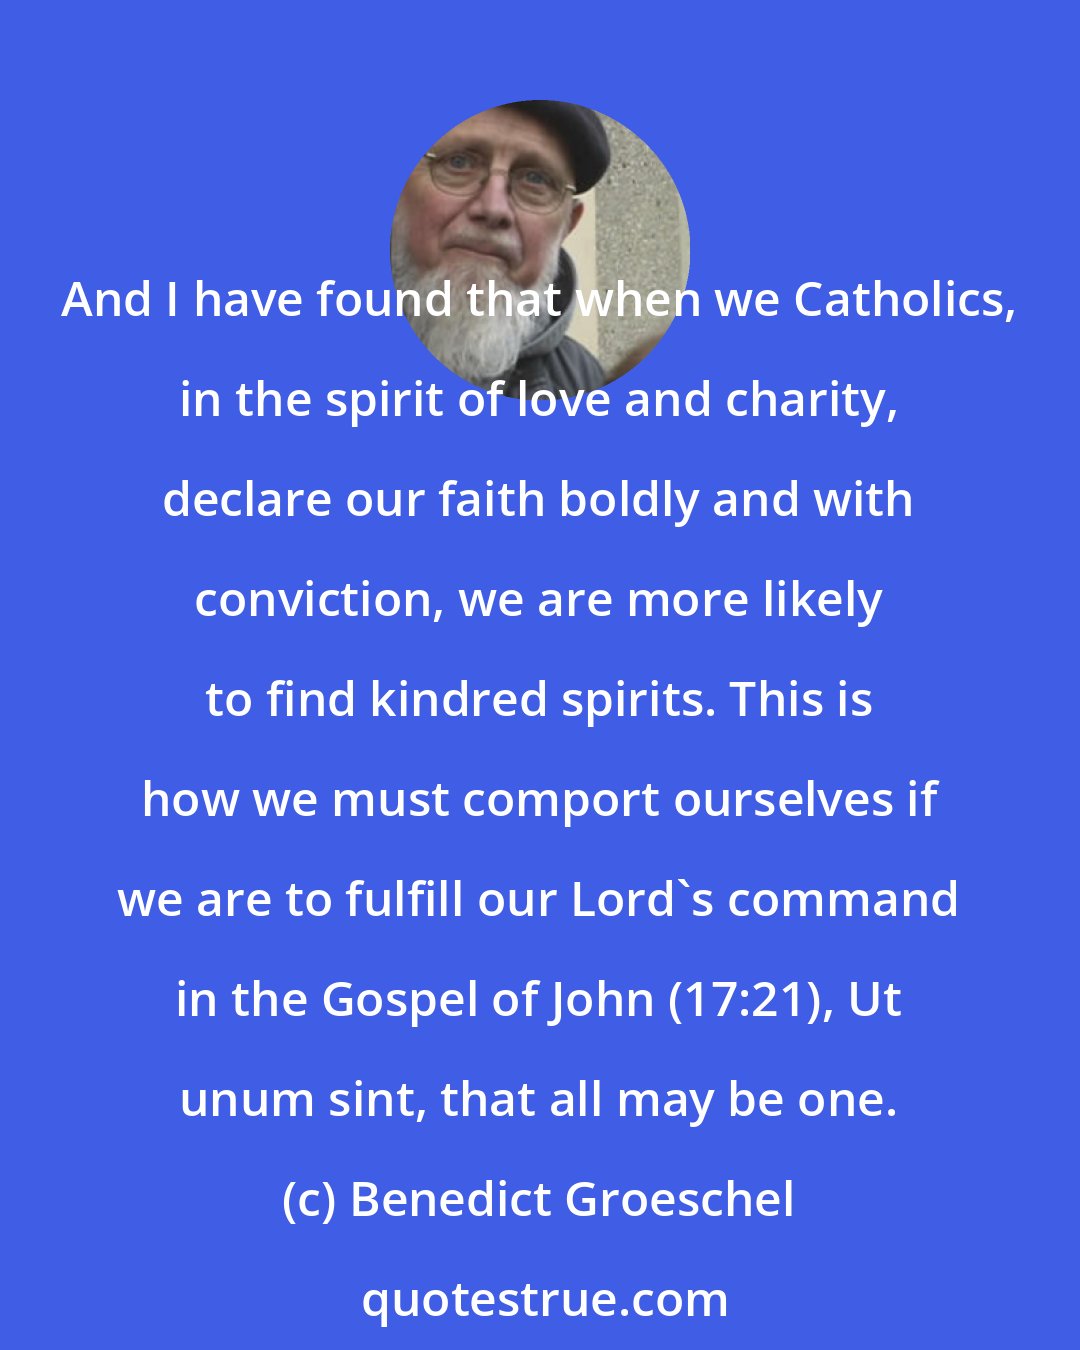 Benedict Groeschel: And I have found that when we Catholics, in the spirit of love and charity, declare our faith boldly and with conviction, we are more likely to find kindred spirits. This is how we must comport ourselves if we are to fulfill our Lord's command in the Gospel of John (17:21), Ut unum sint, that all may be one.